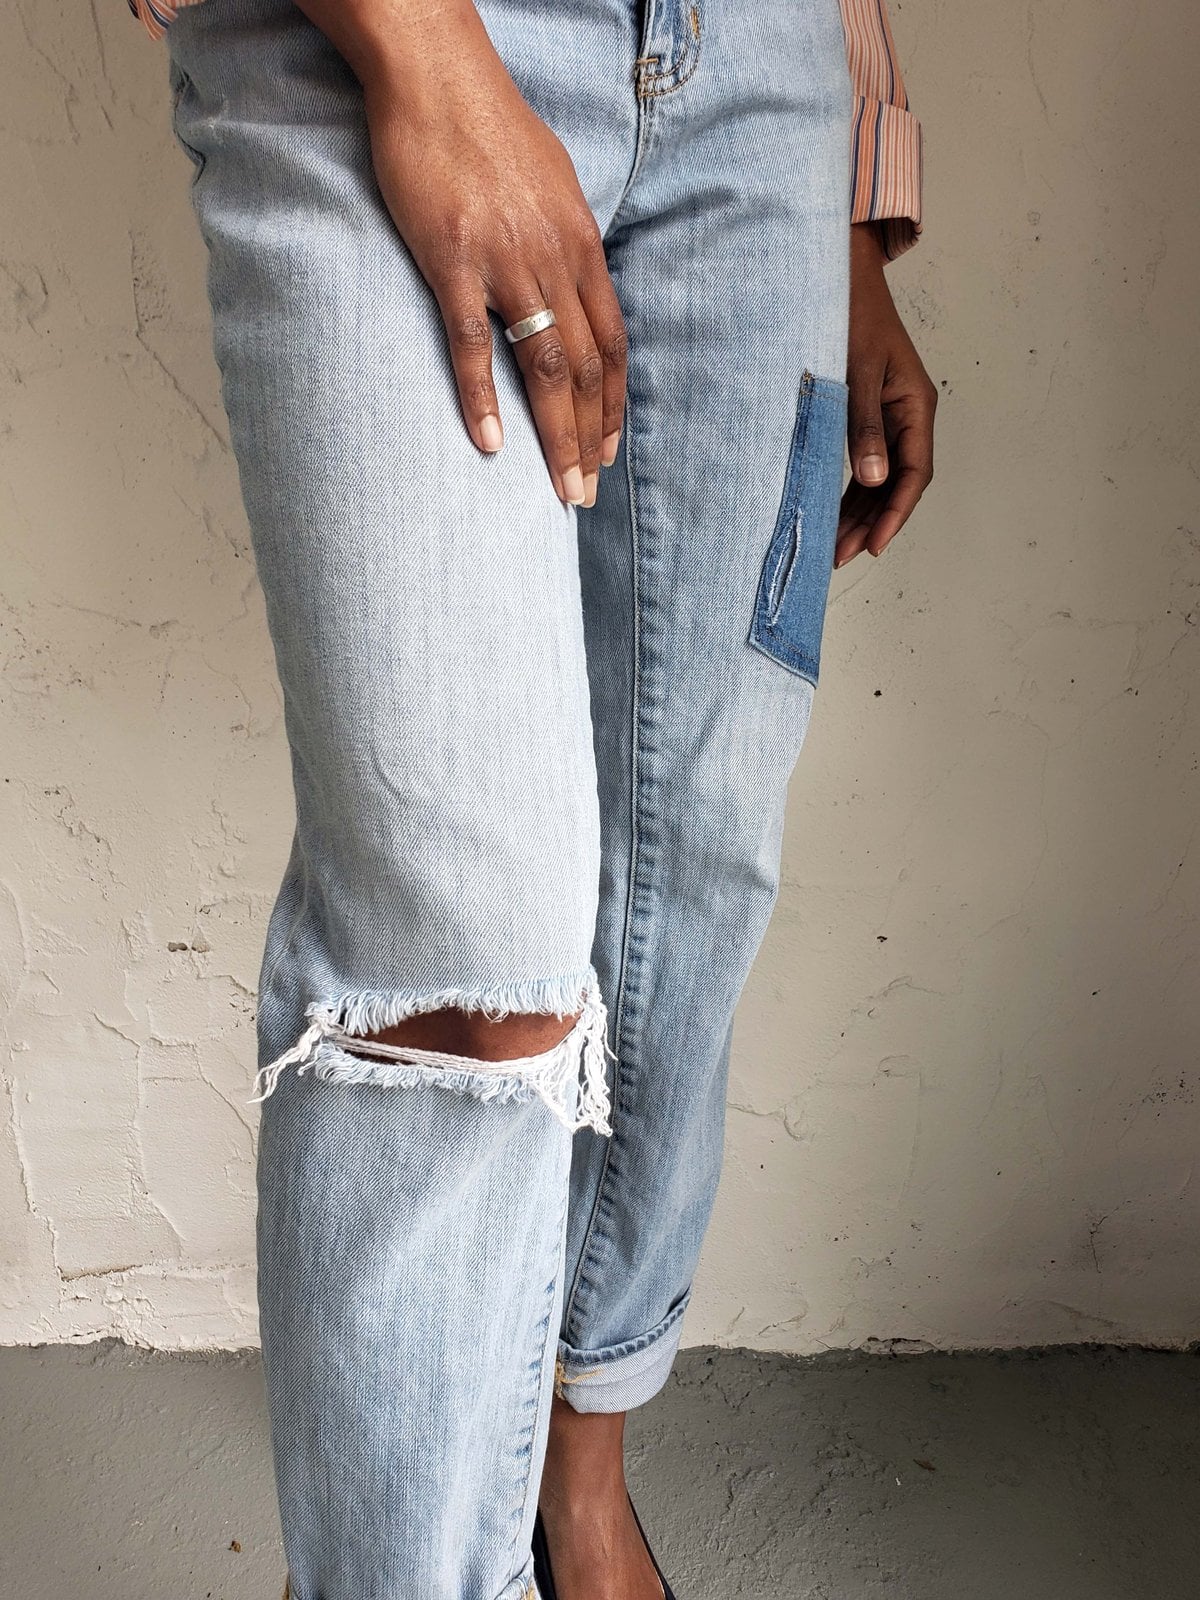 old fashioned denim jeans